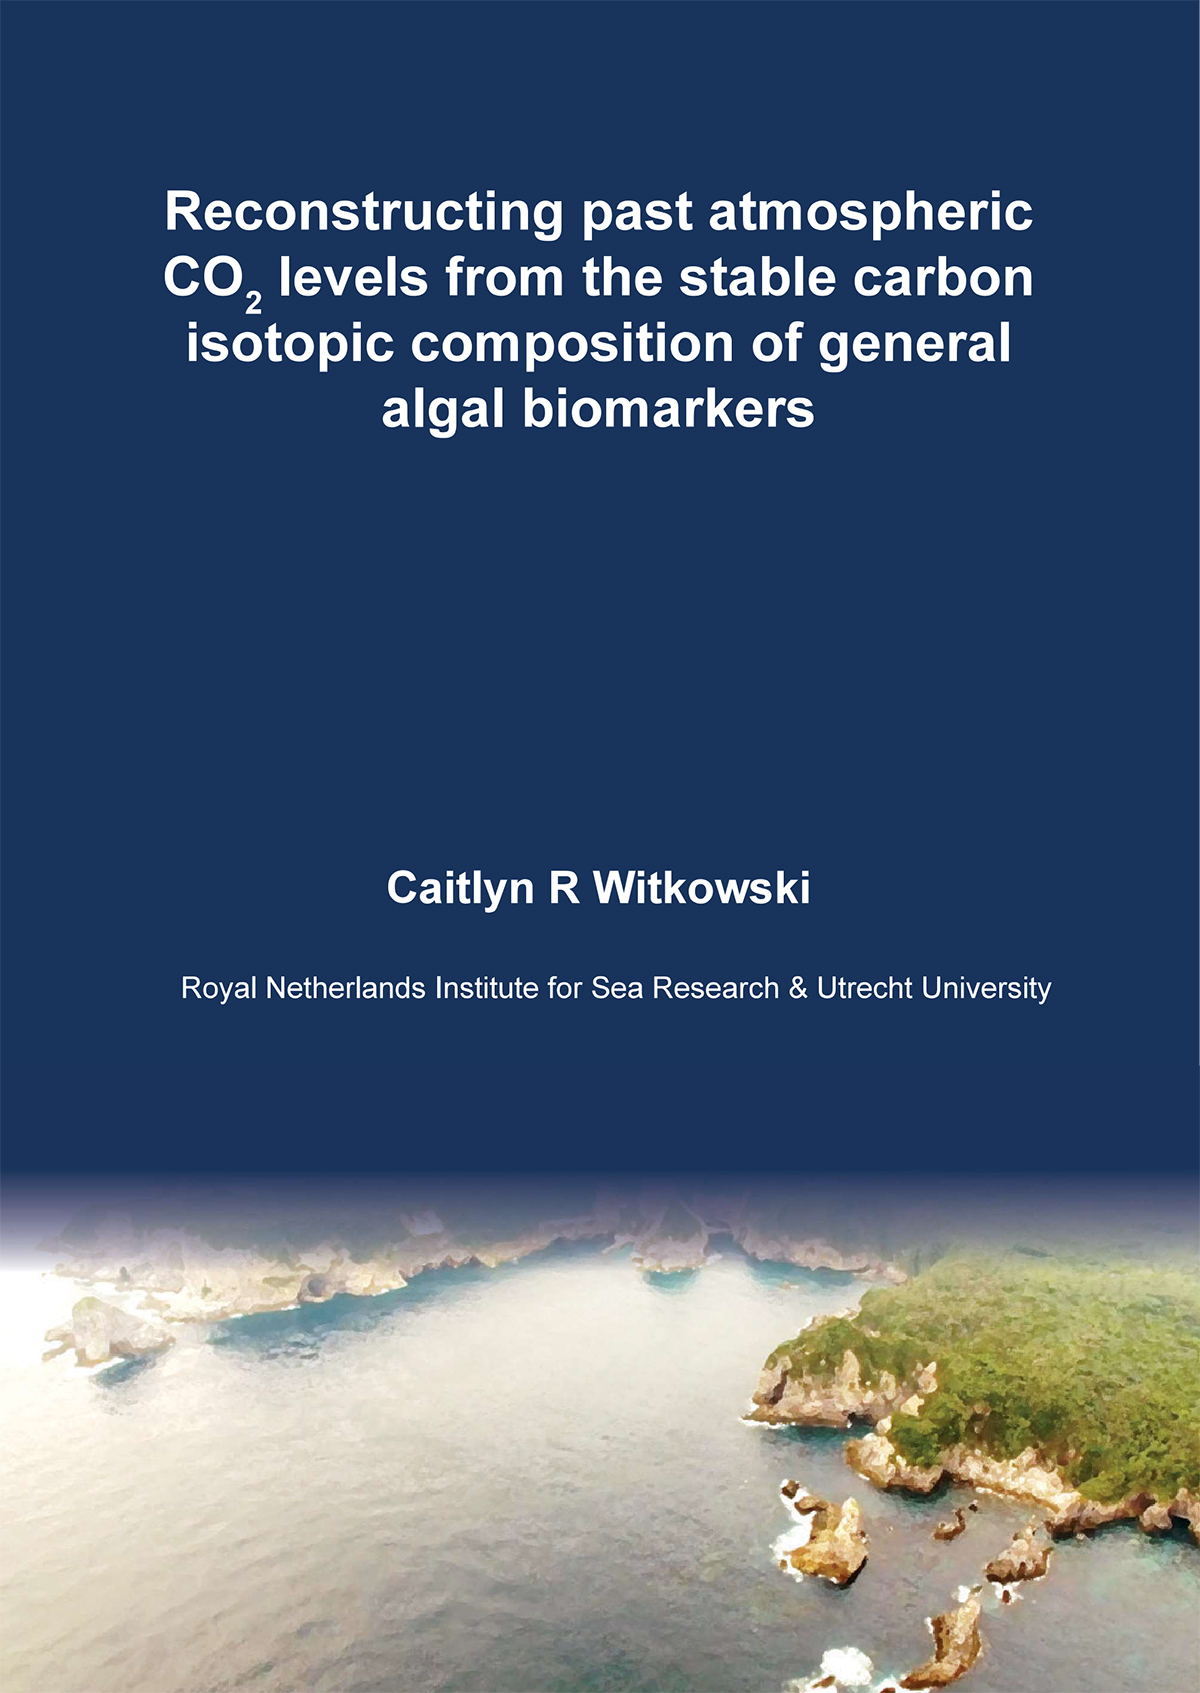 Caitlyn Witkowski will defend her thesis on 17 January 2020 at Utrecht University 